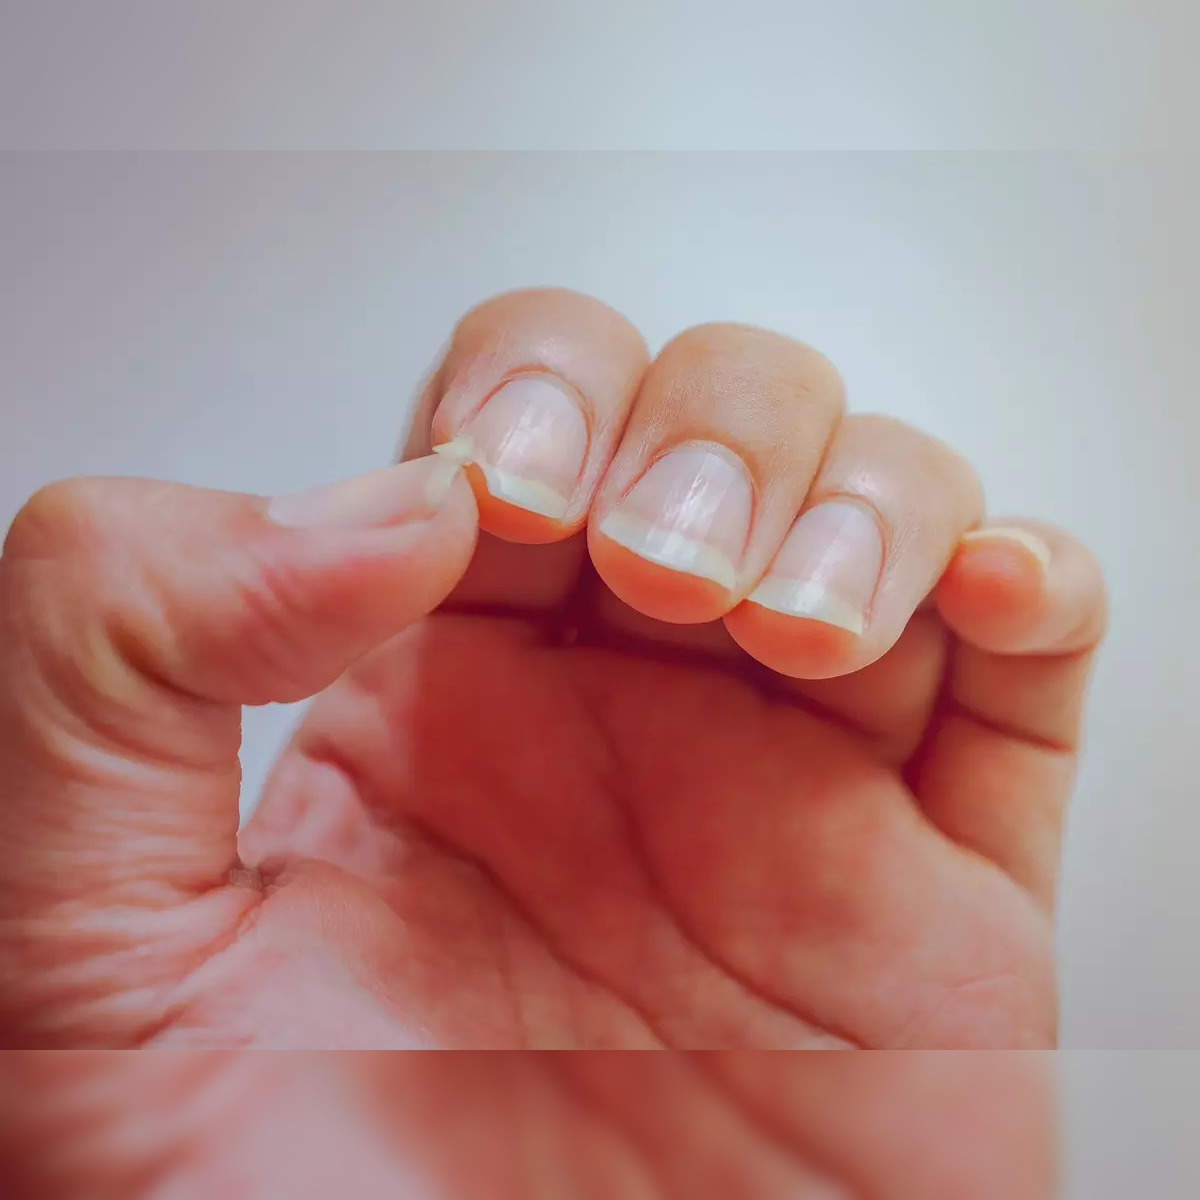 This Fingernail Mark Could Be a Skin Cancer Symptom | The Healthy @Reader's  Digest